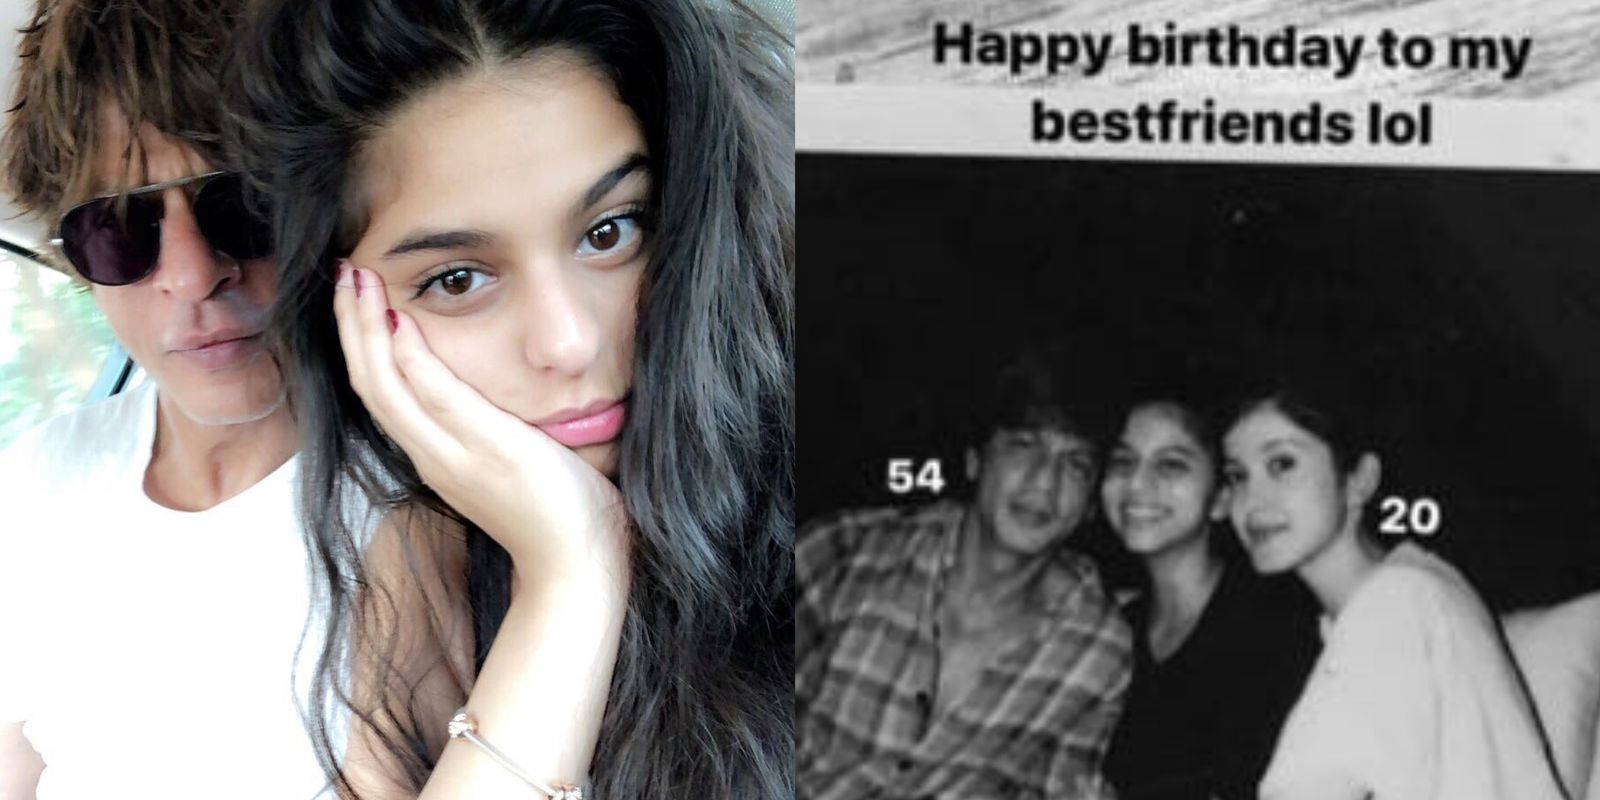 Suhana Khan Shares A Special Birthday Post For Her Best Friends Shah Rukh Khan And Shanaya Kapoor